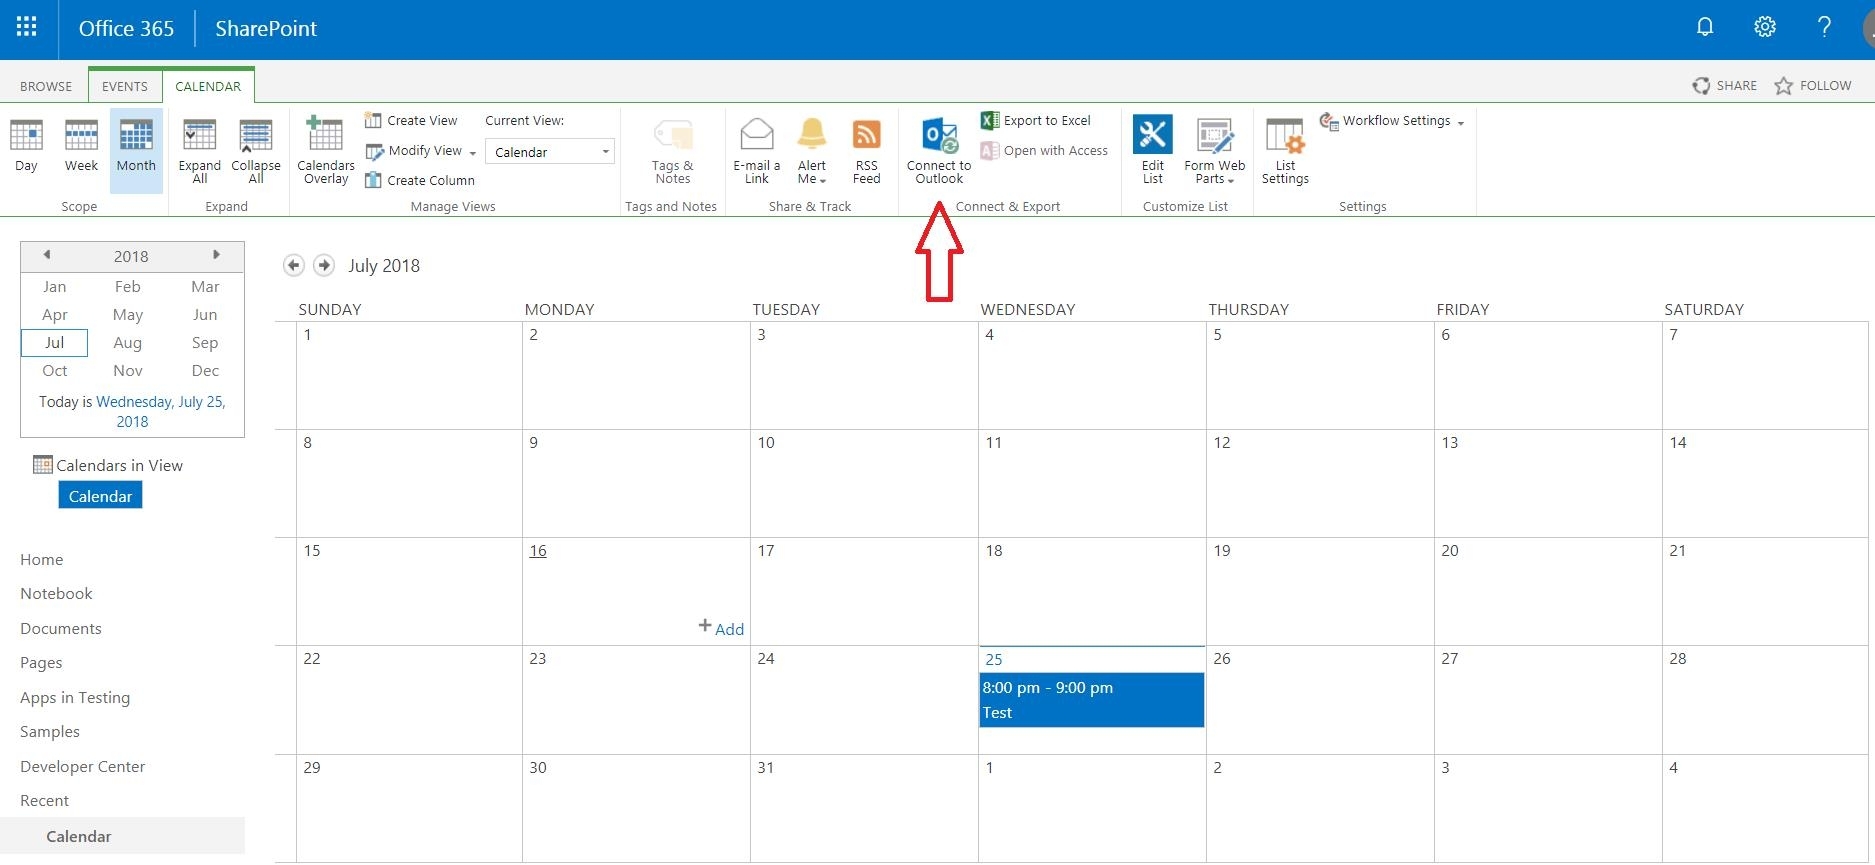 Sharepoint Calendar Outlook. Sharepoint Calendar In Outlook with regard to How To Display Image Of Sharepoint Calendar